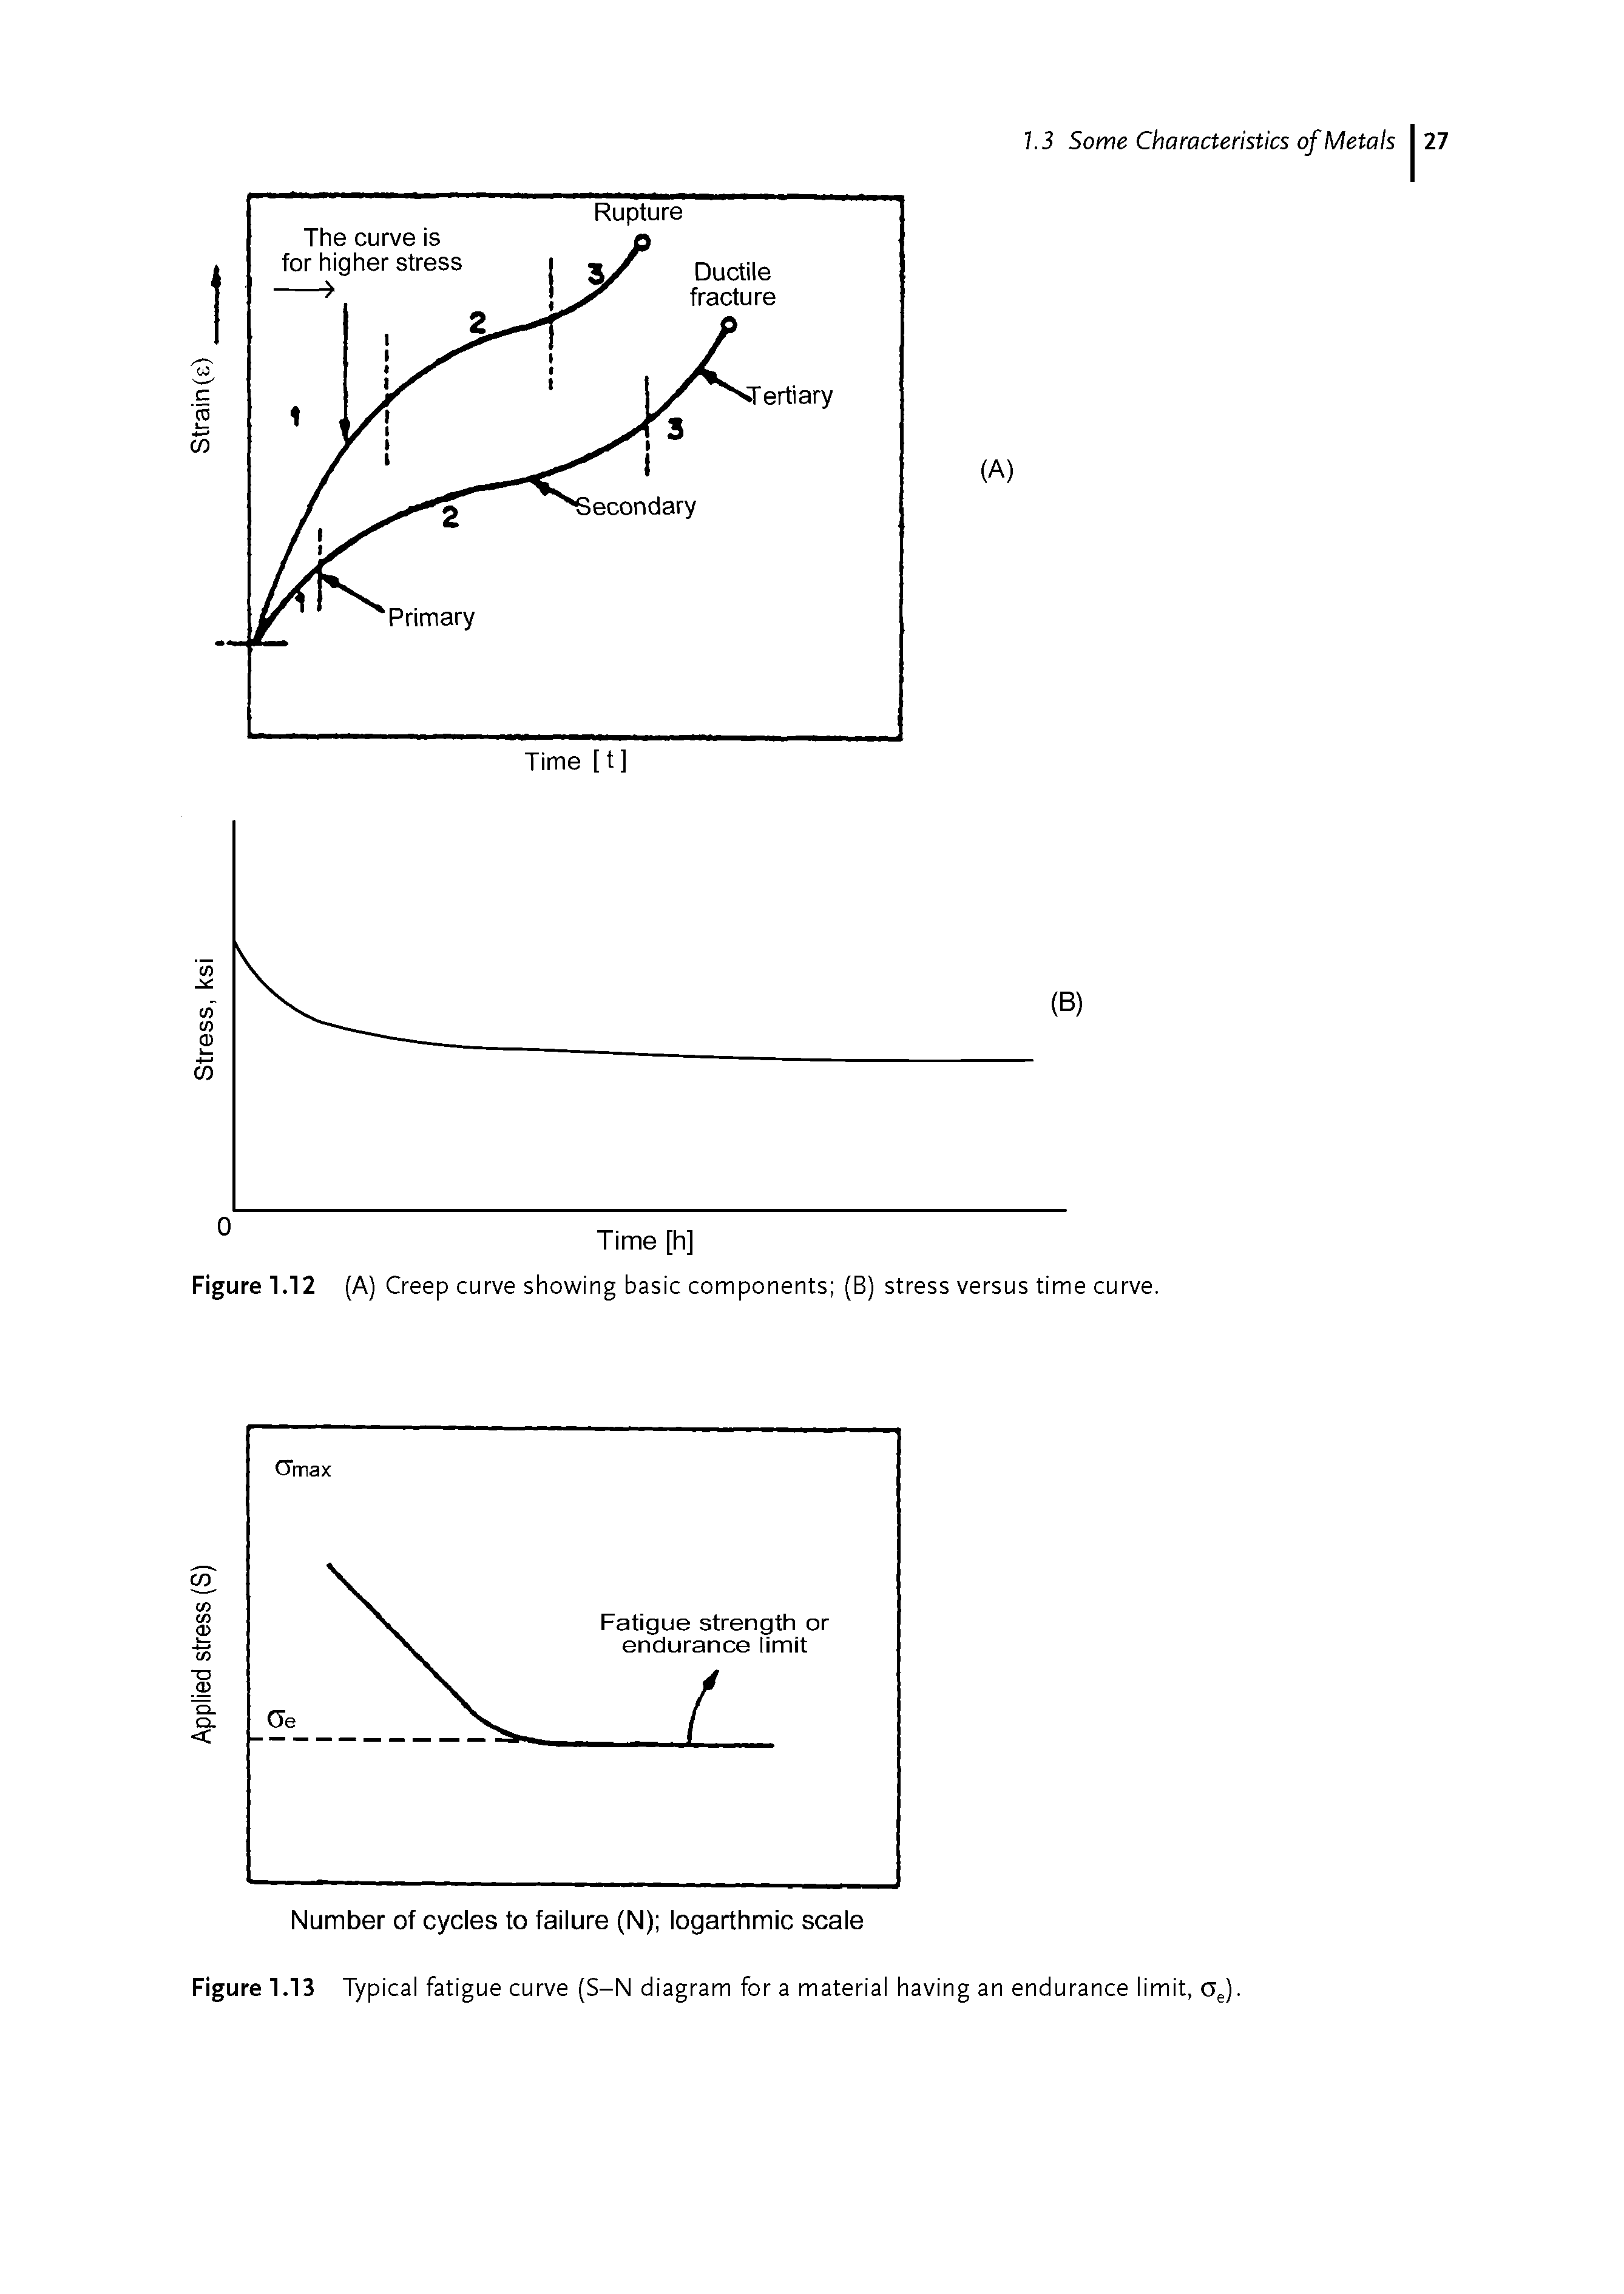 Figure 1.13 Typical fatigue curve (S-N diagram for a material having an endurance limit, oe).